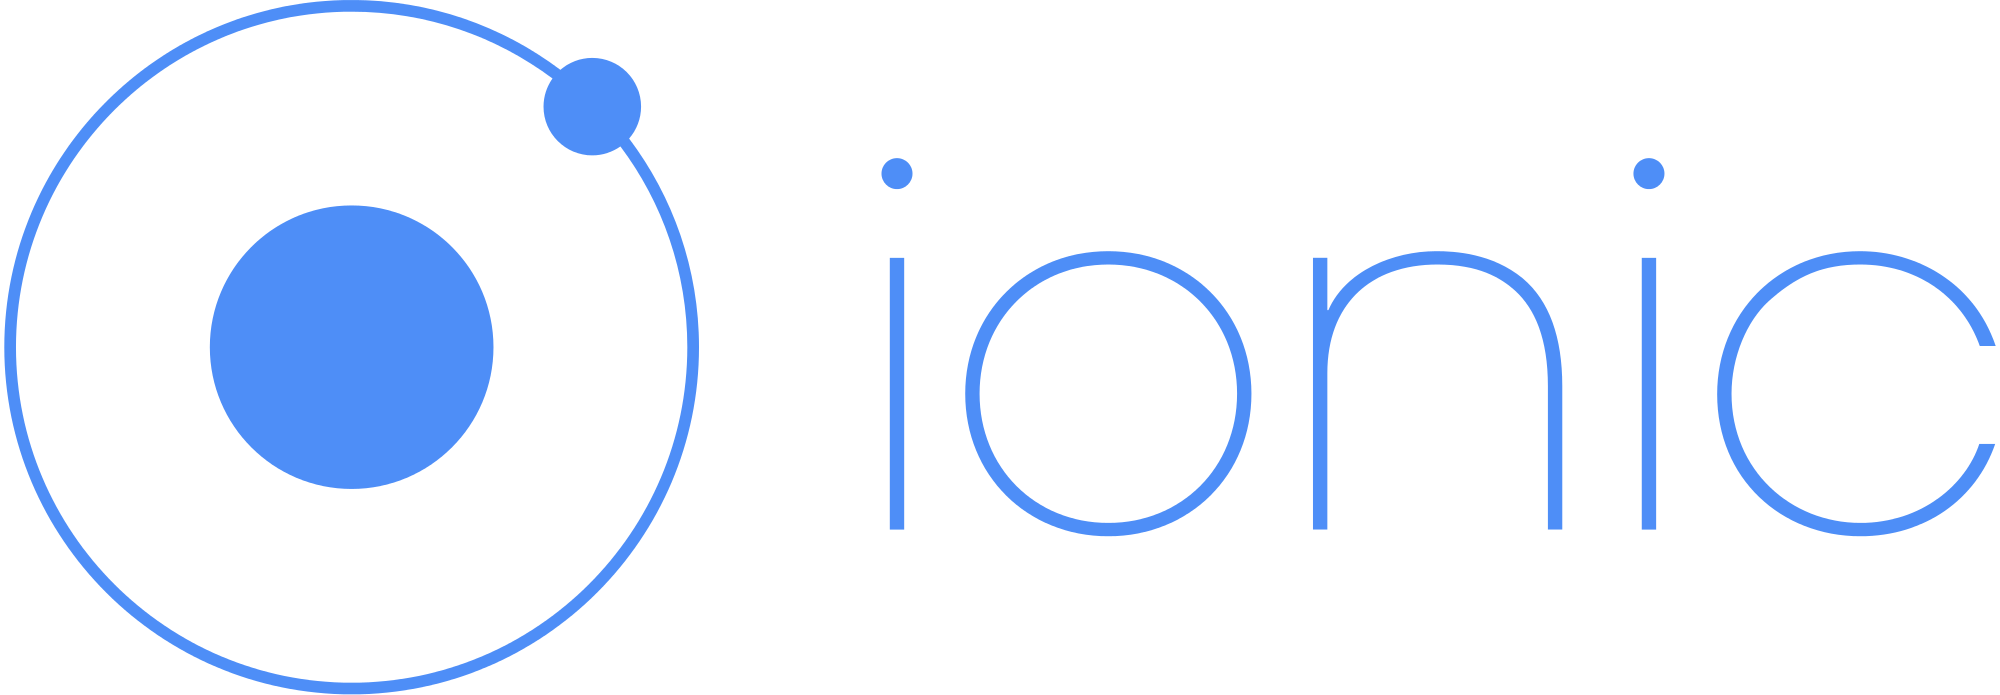 Hire Ionic Hybrid Mobile Developers